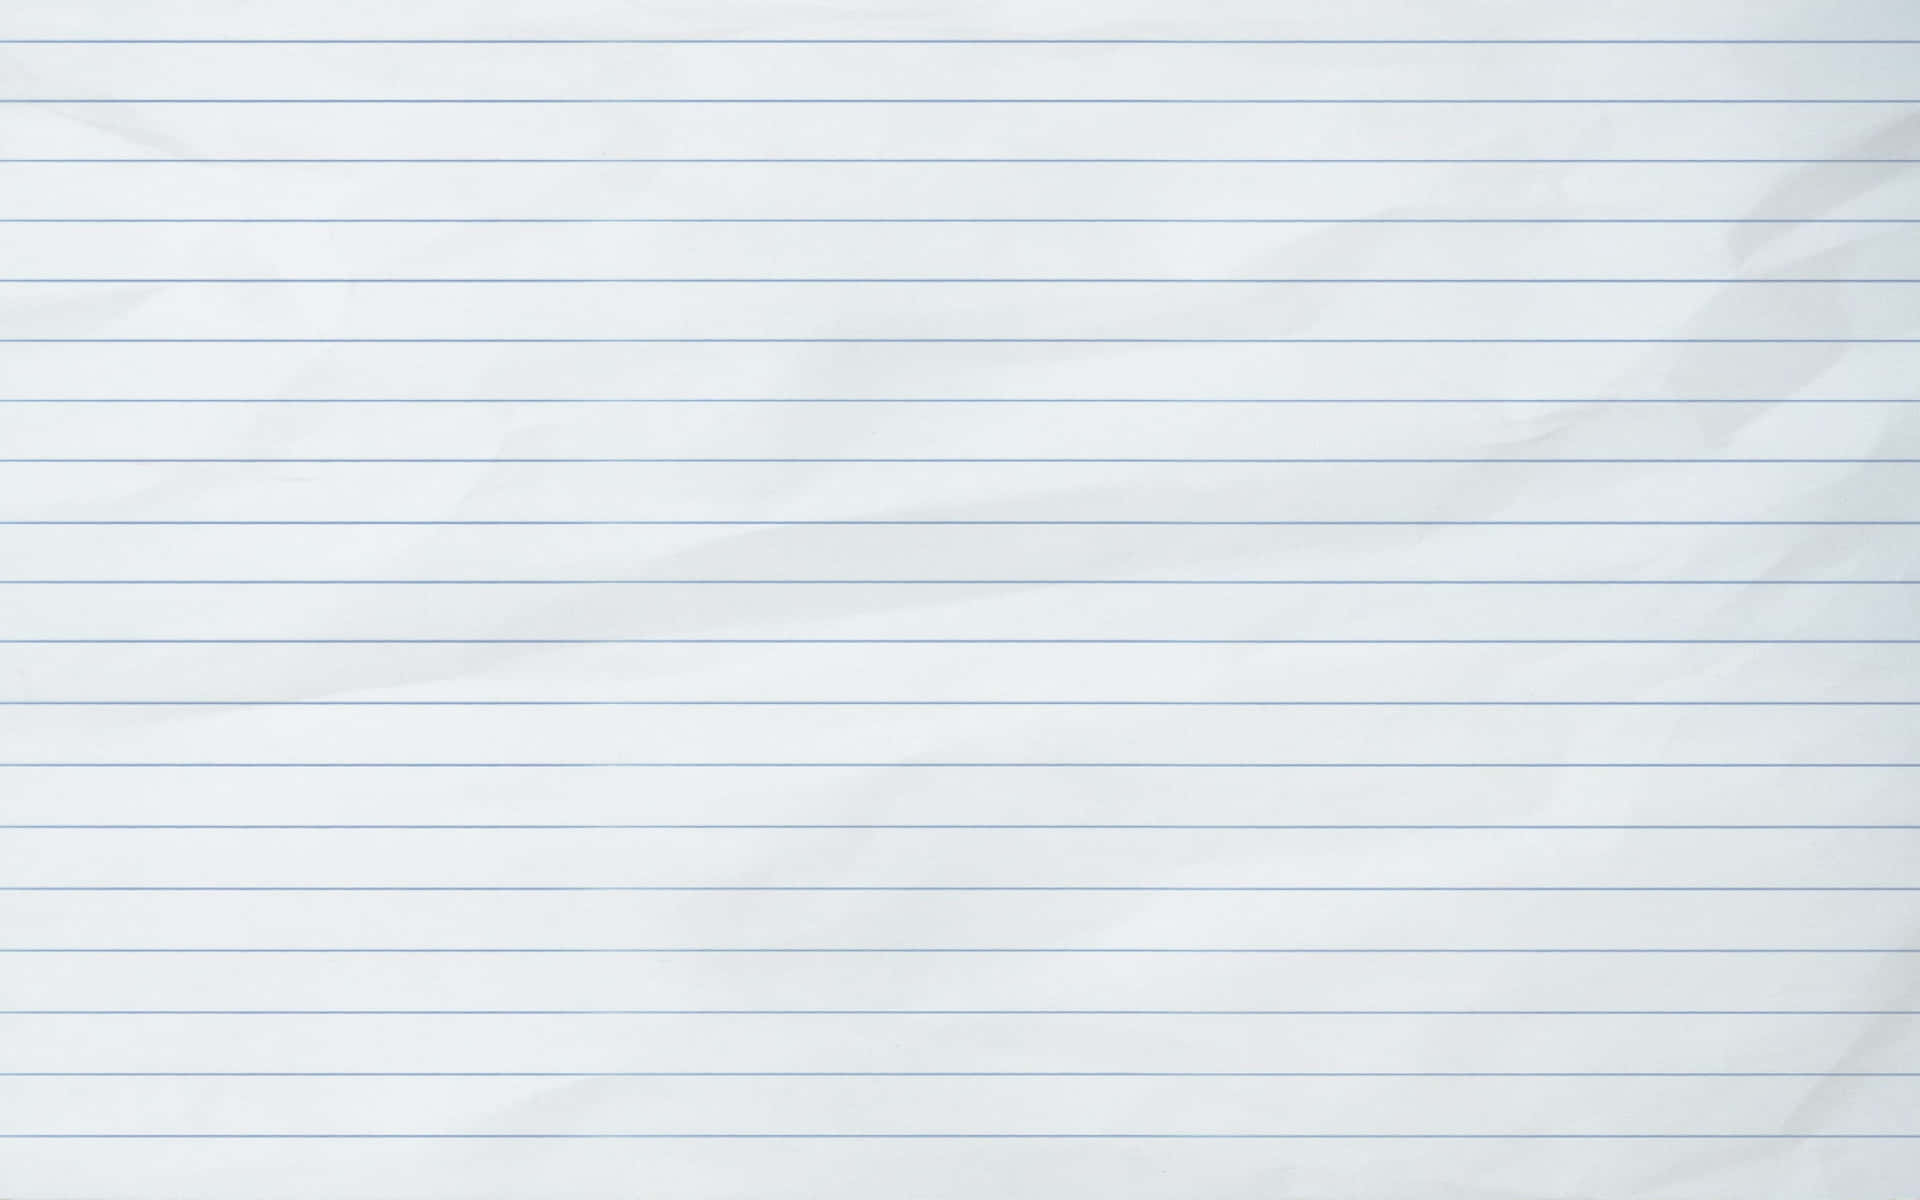 100+] Lined Paper Backgrounds